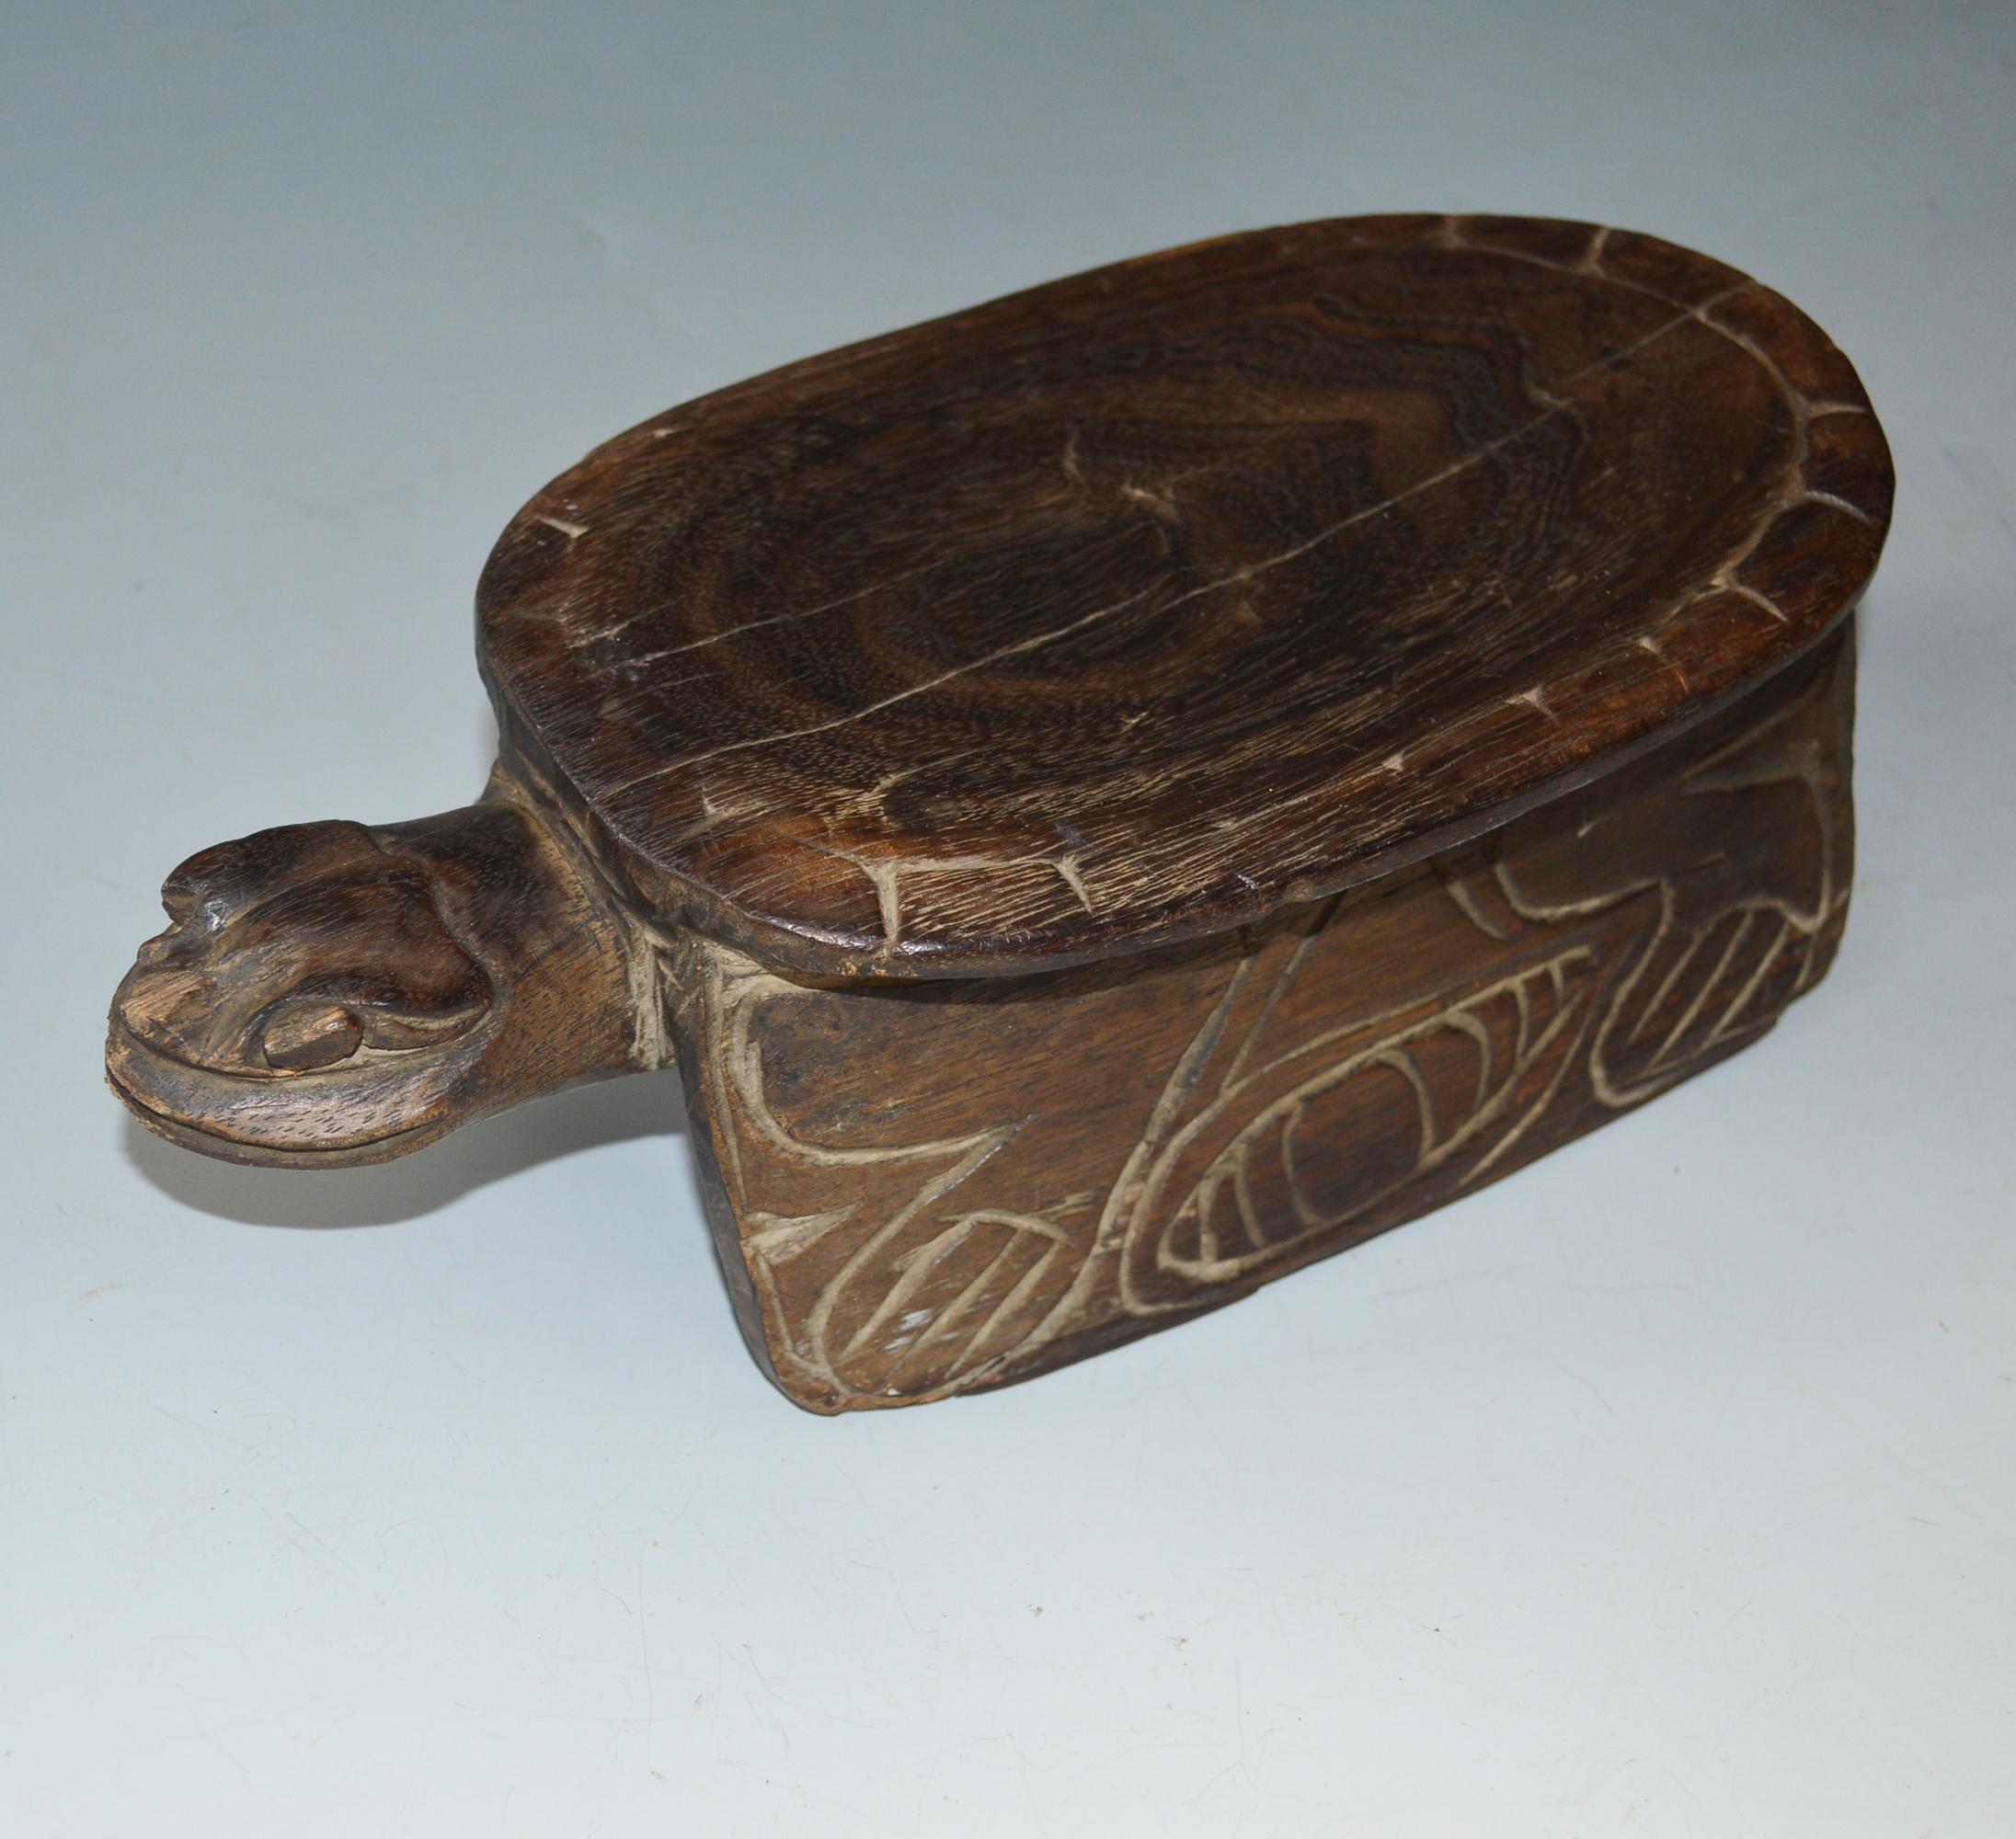 Sepik Turtle stool Head Rest Oceanic Polynesian Australian

A cute small stool or Headrest carved in the form of a turtle from the Sepik region of Papua new Guinea

A beautiful object for collection or Art display.
